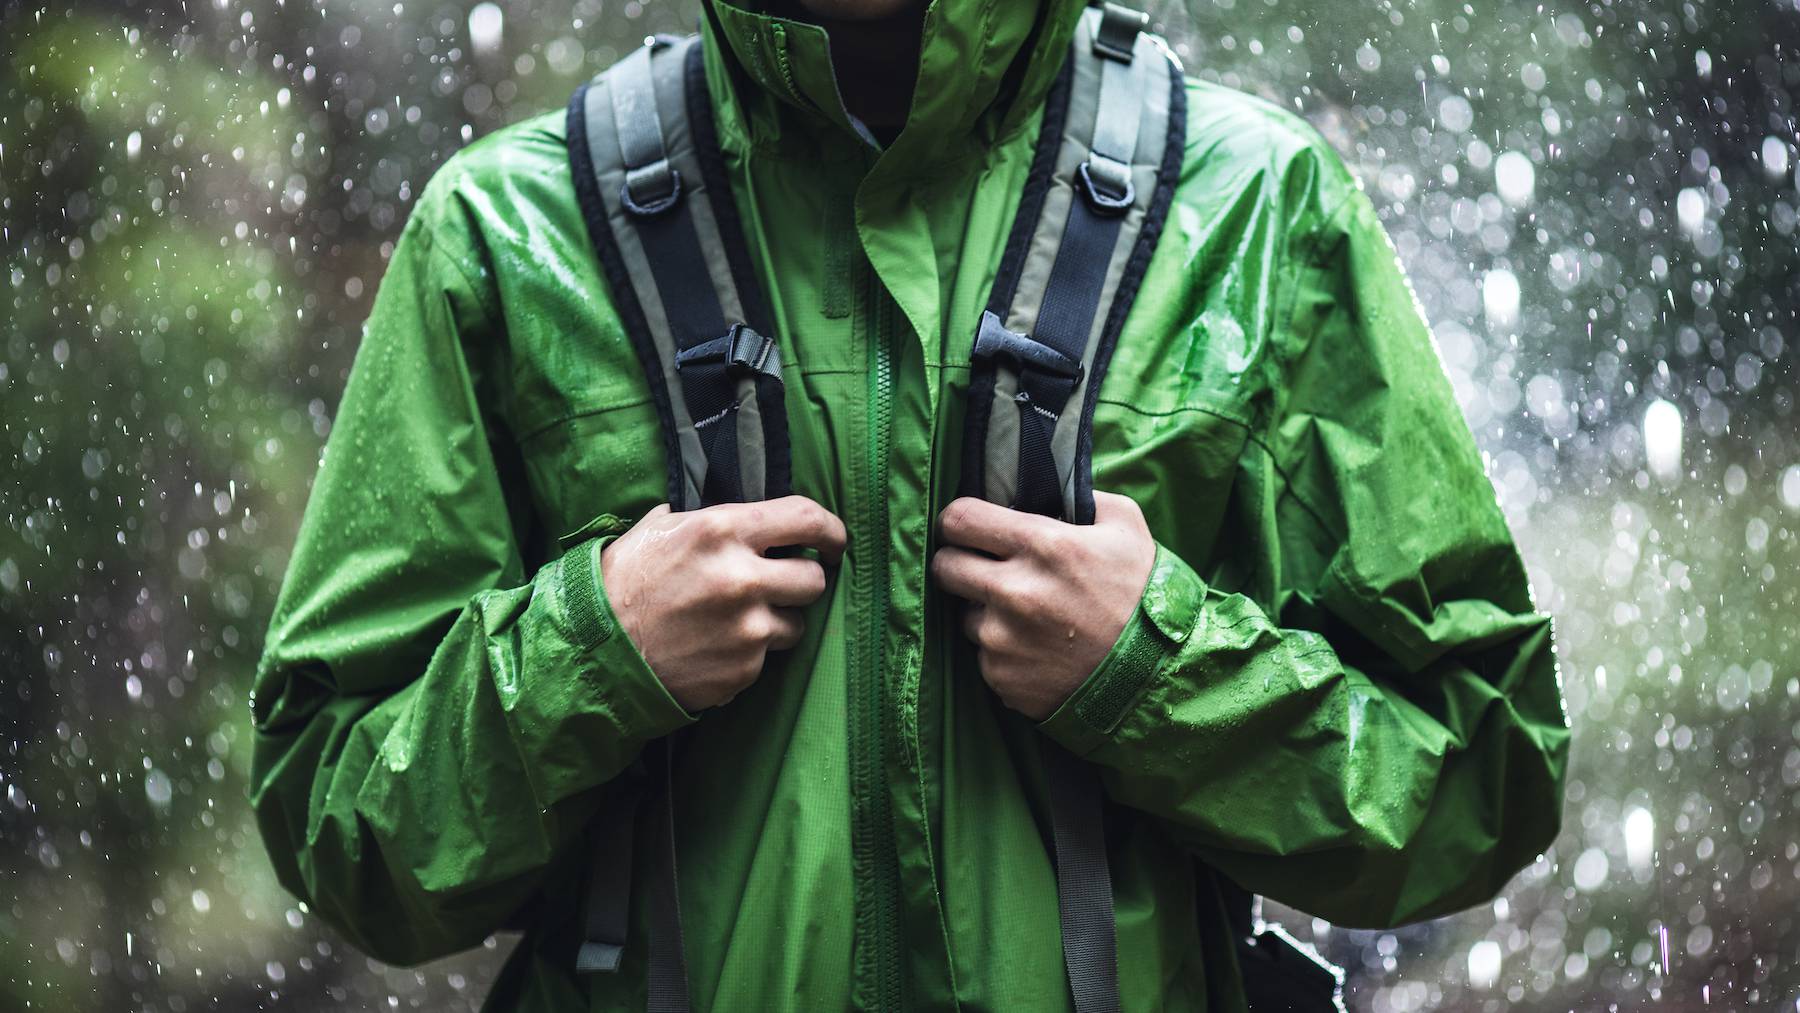 A man wearing a green waterproof jacket and grey backpack in the rain.